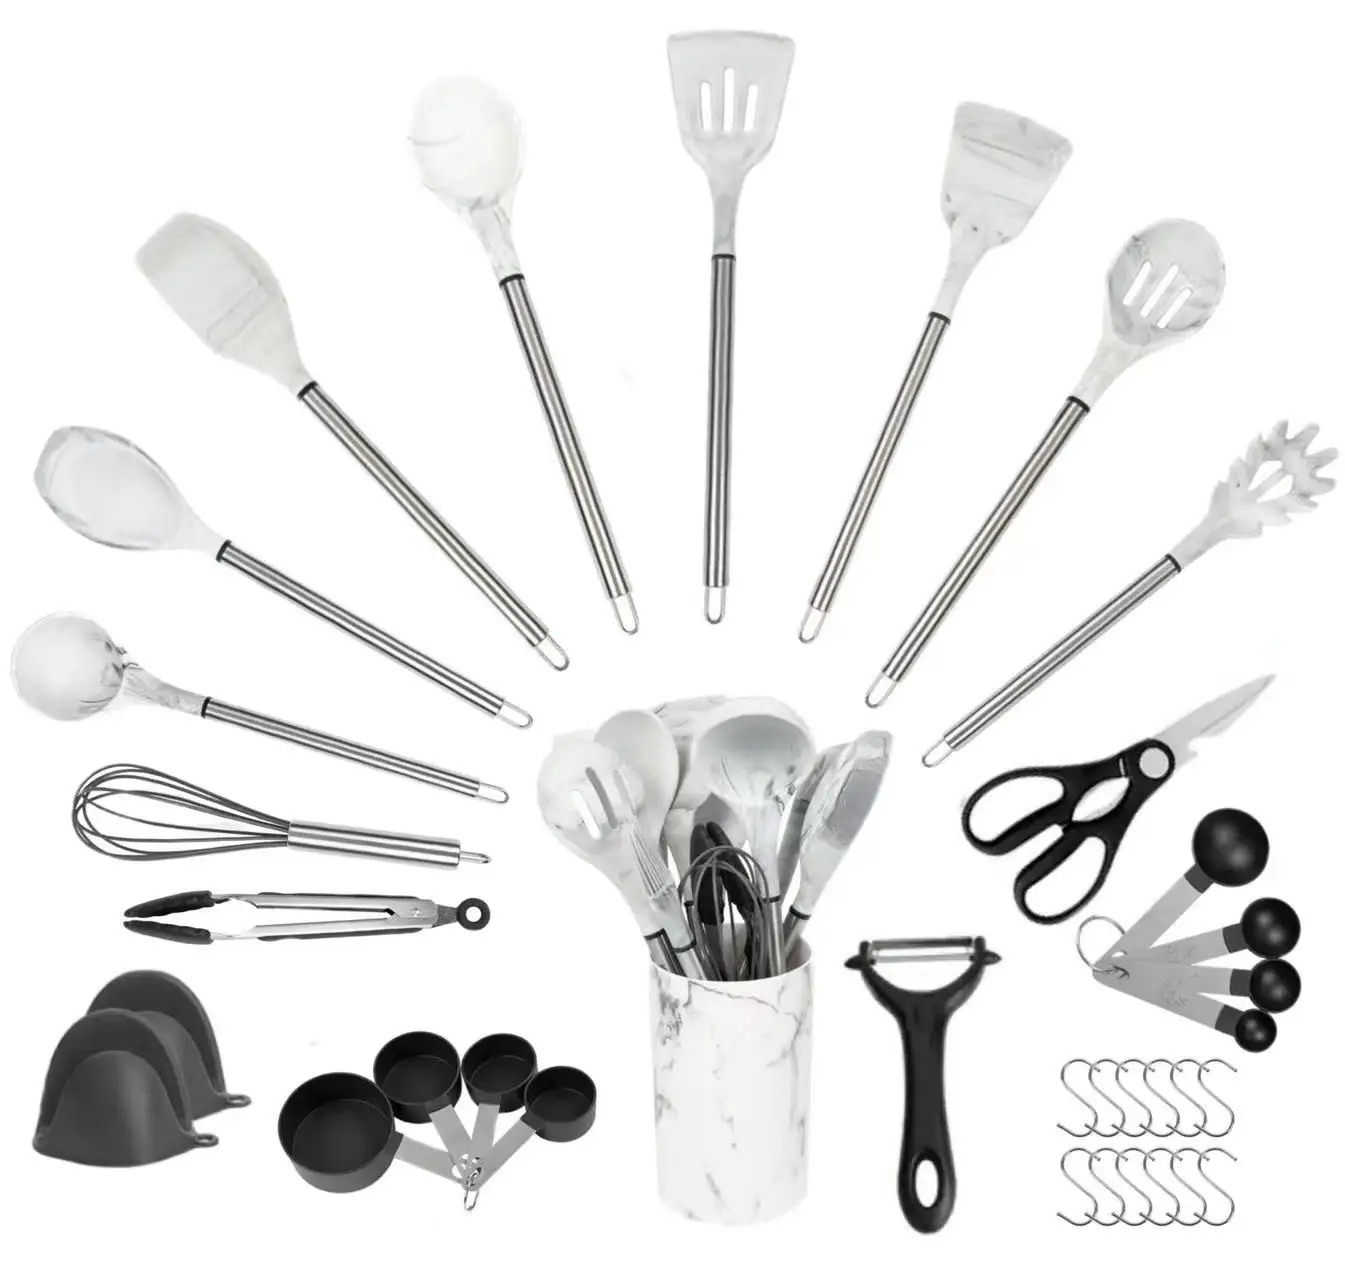 31Pcs Stainless Steel Kitchen Cooking Utensils Tools Kitchen Accessories Gadgets SetMarble Silicone Utensils Set